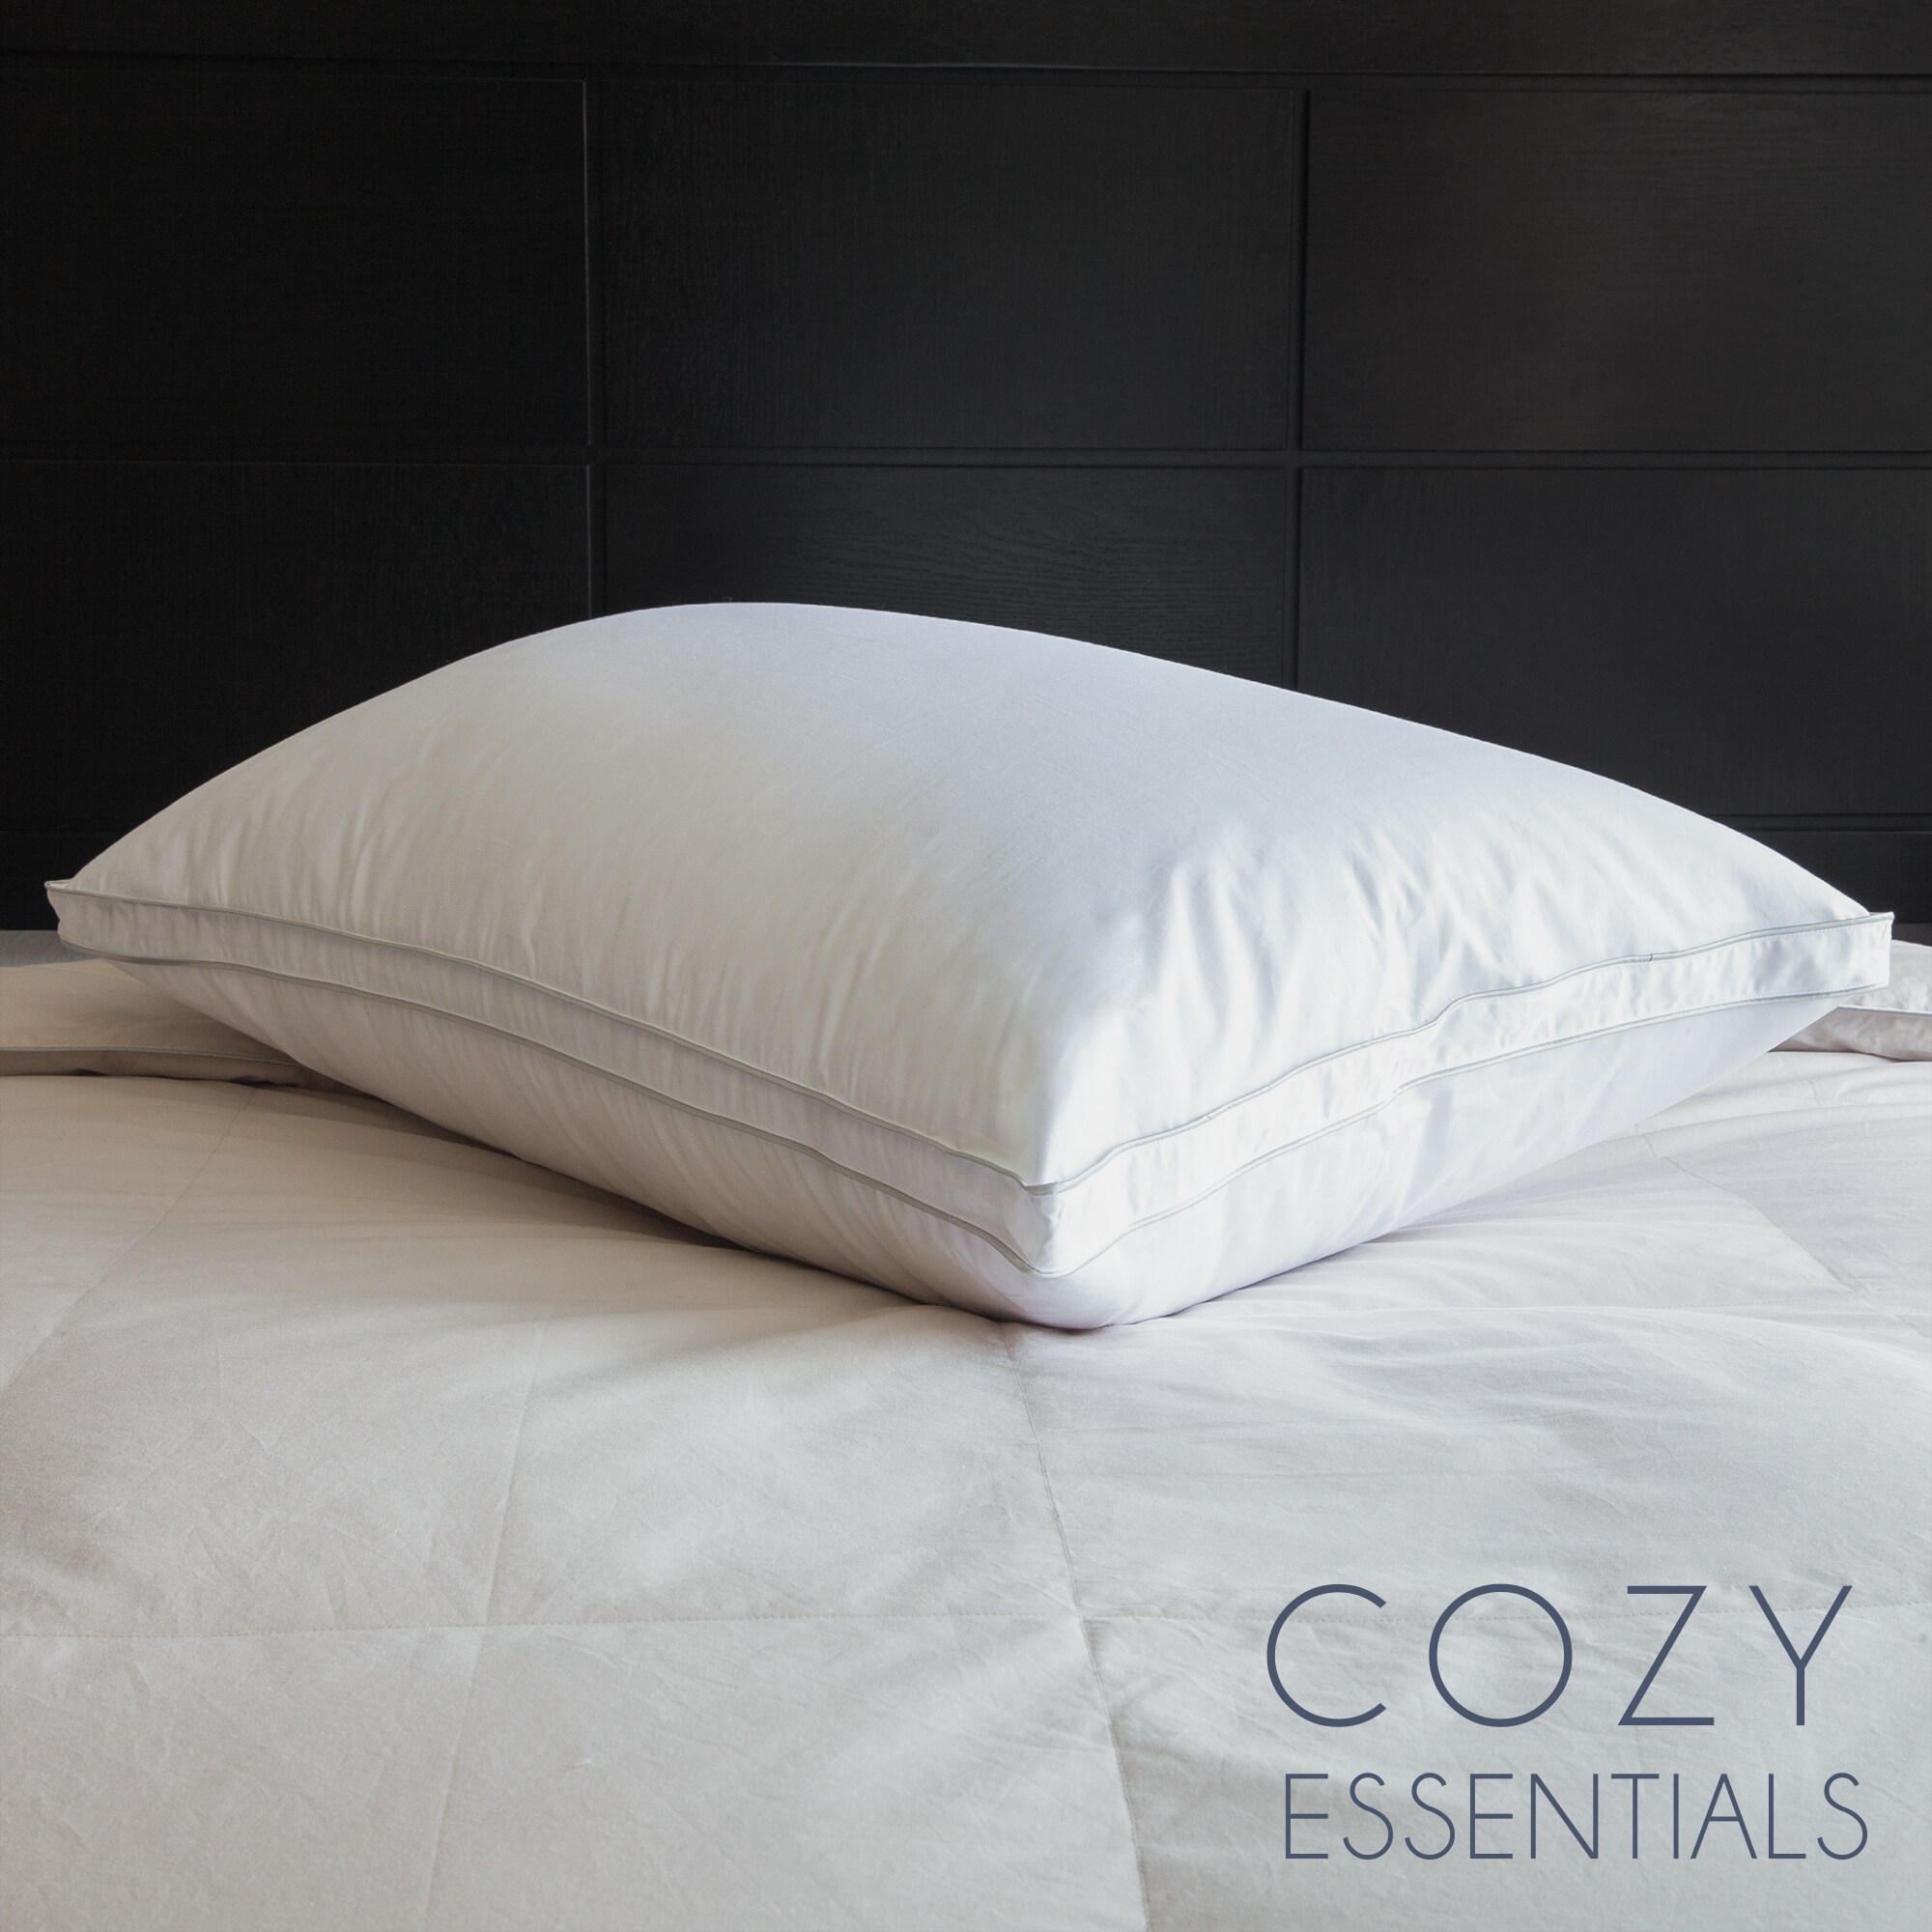 Cozy Essentials Standard Medium Down Alternative Bed Pillow in the Bed ...